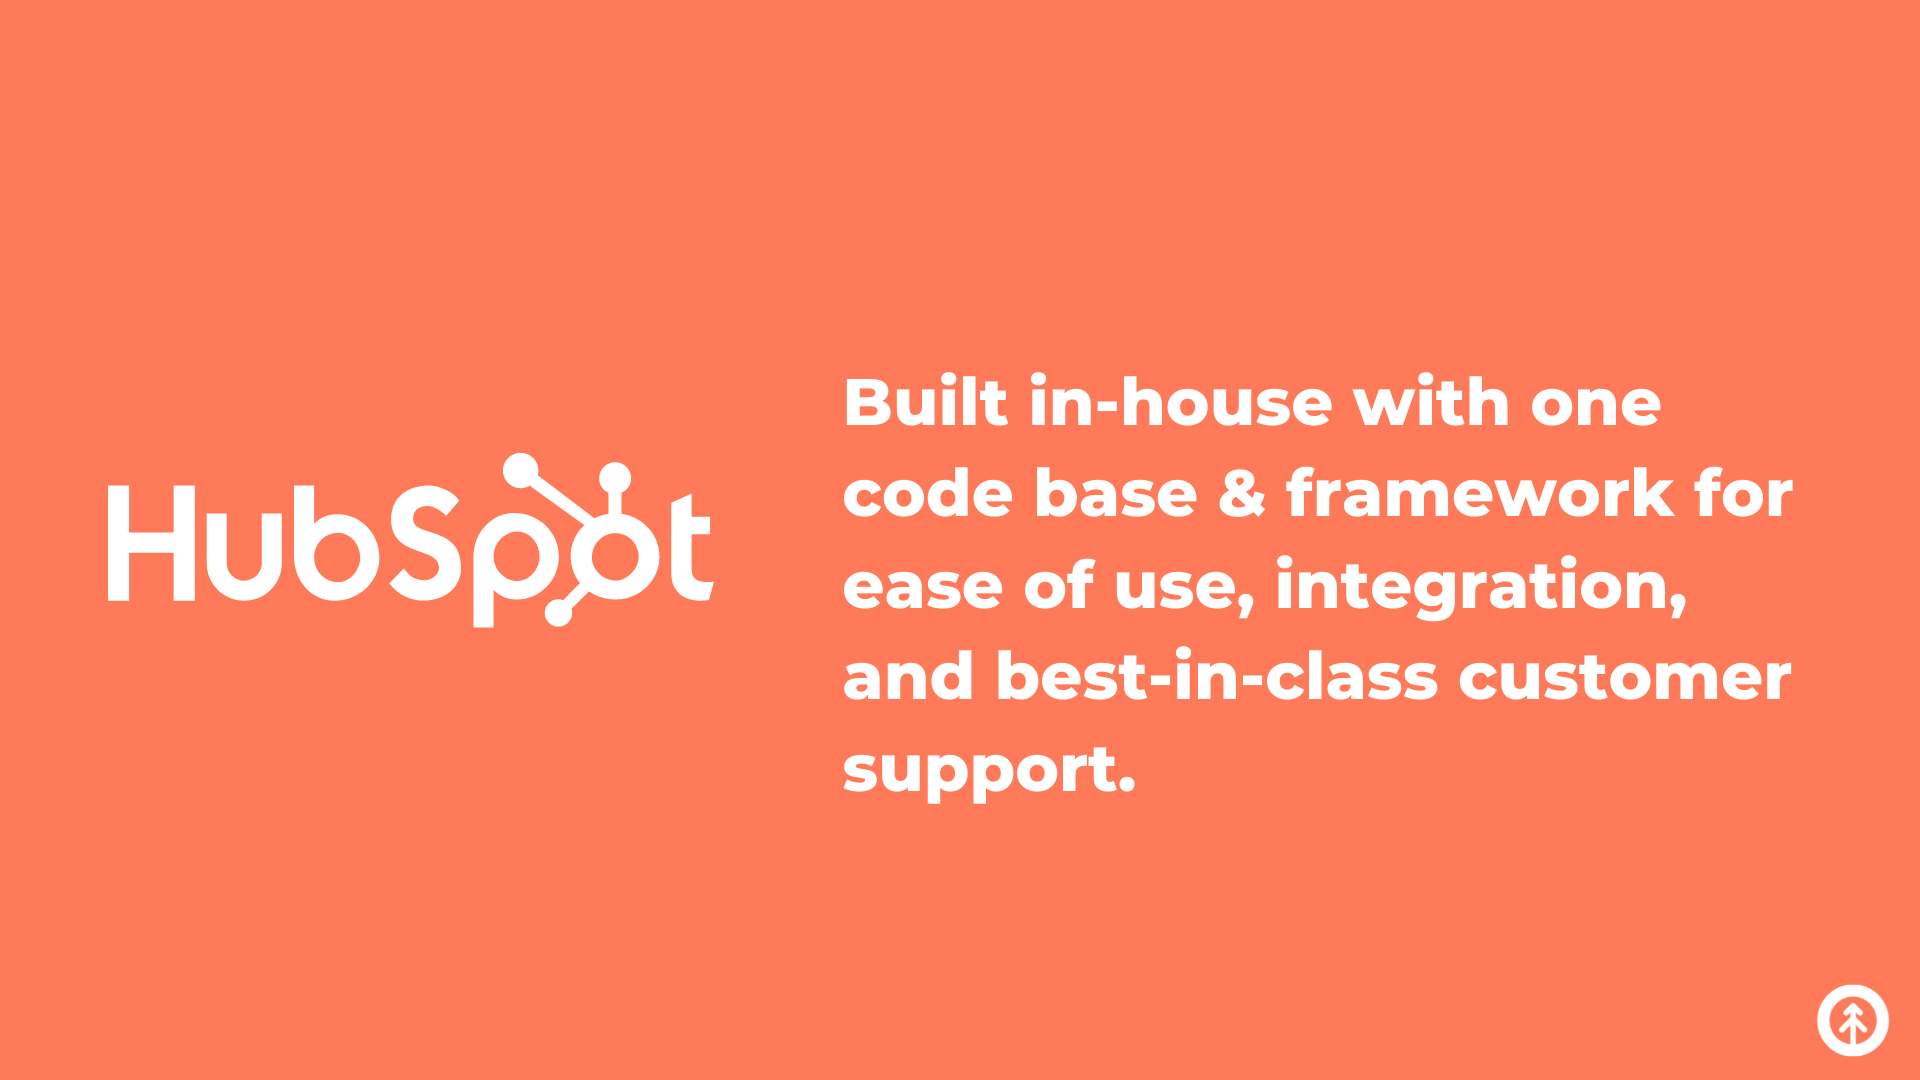 An infographic from Growth Marketing Firm showing the words: “HubSpot: Built in-house with a one code base and framework for ease of use, integration, and support” against an orange background. 